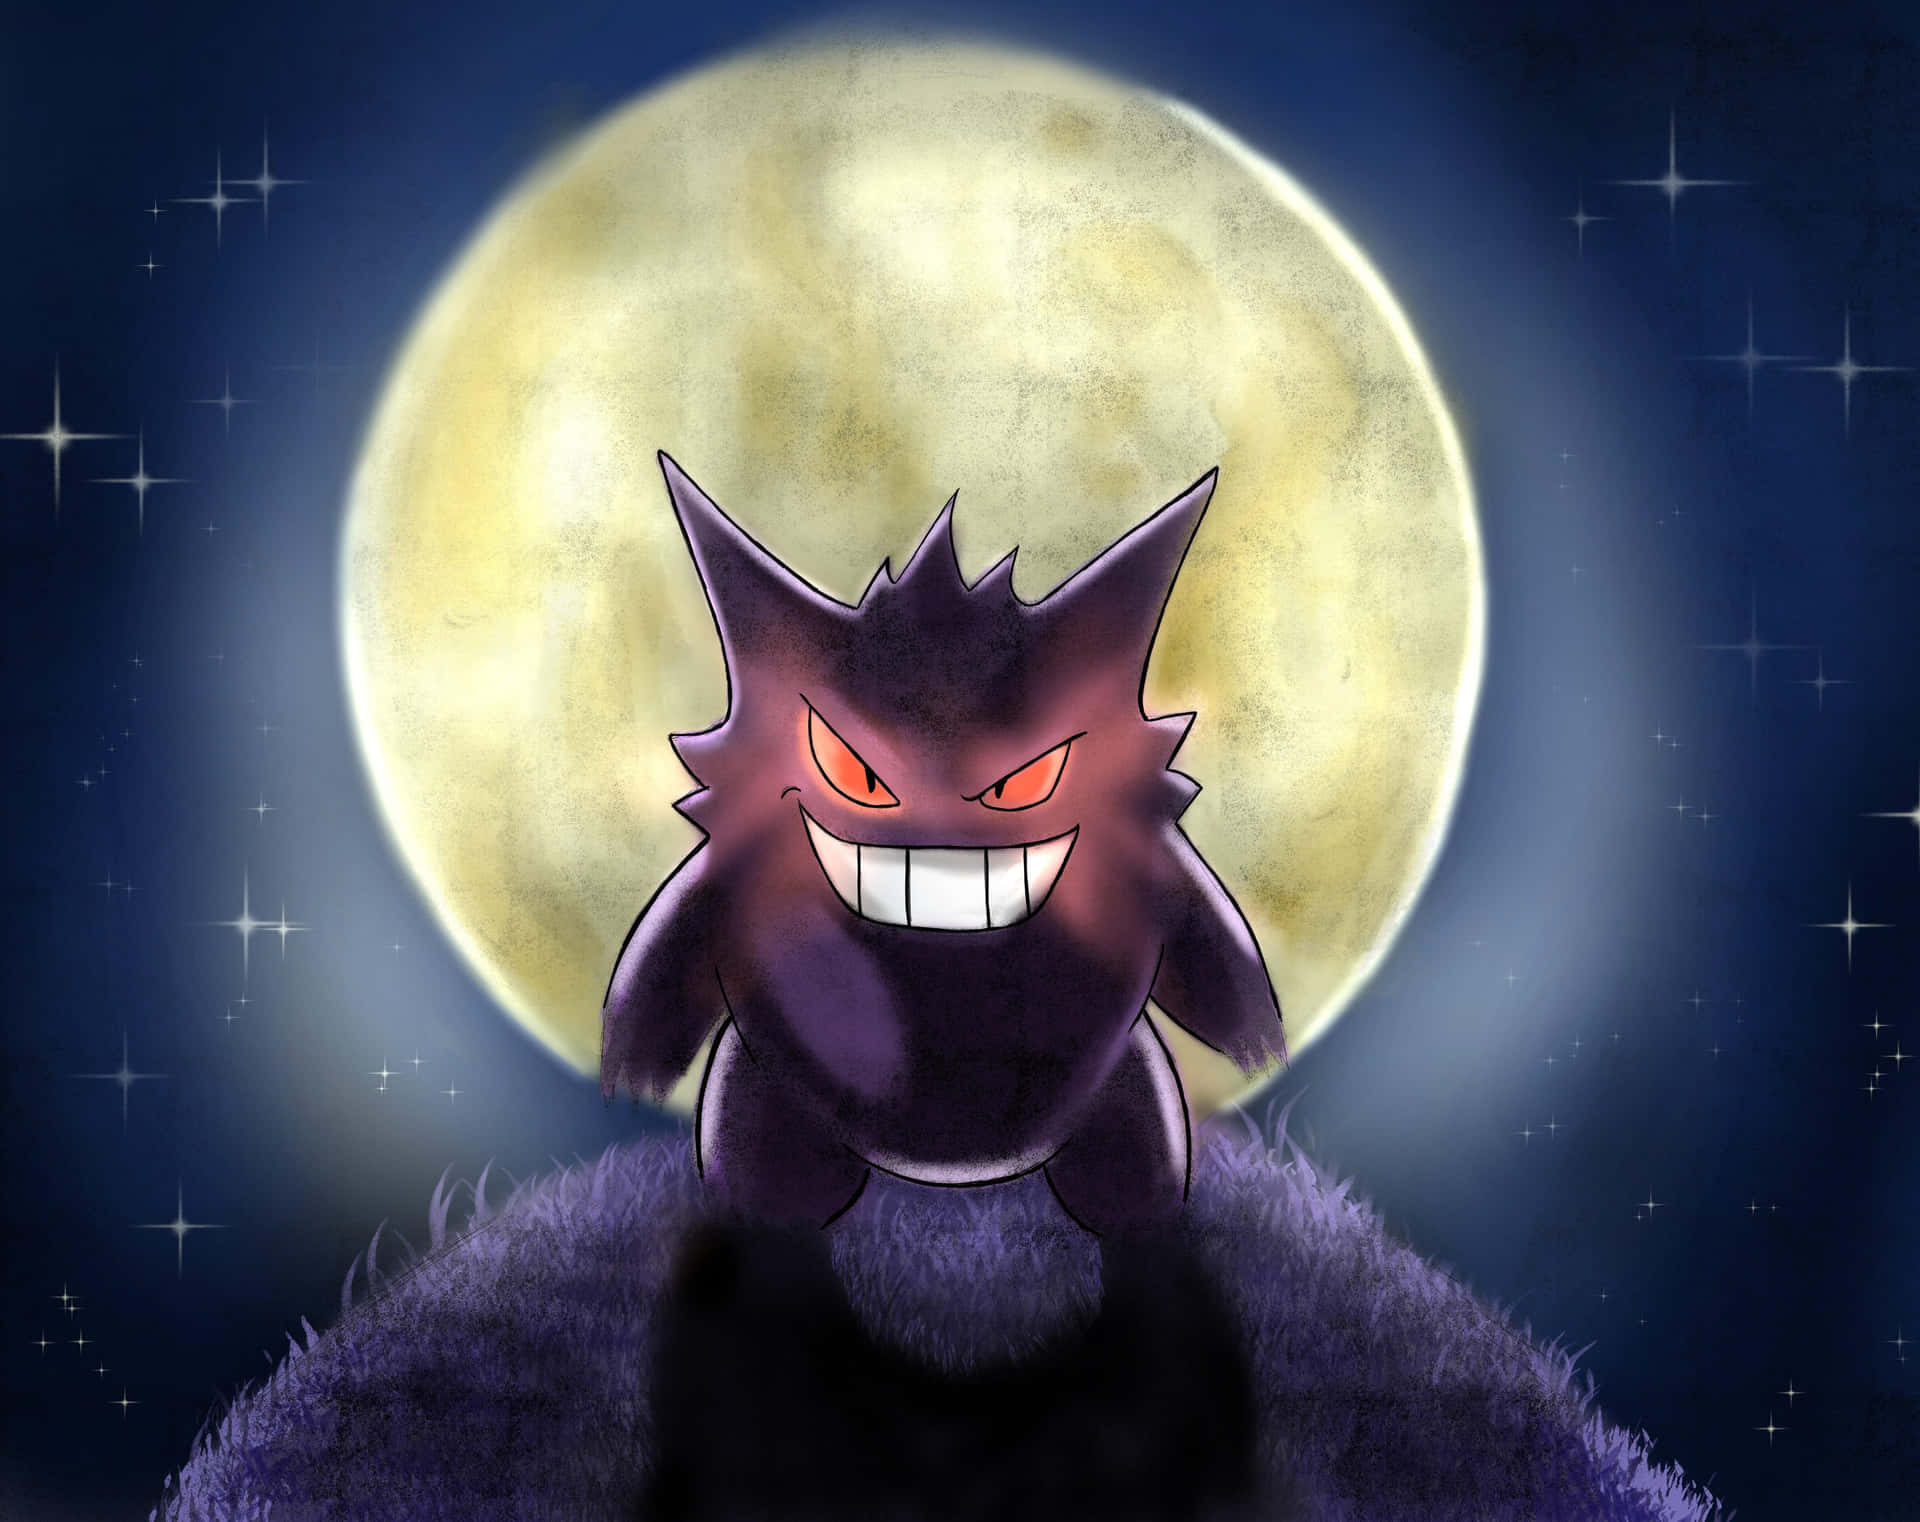 "Strike fear into your opponents with the legendary Gengar!"